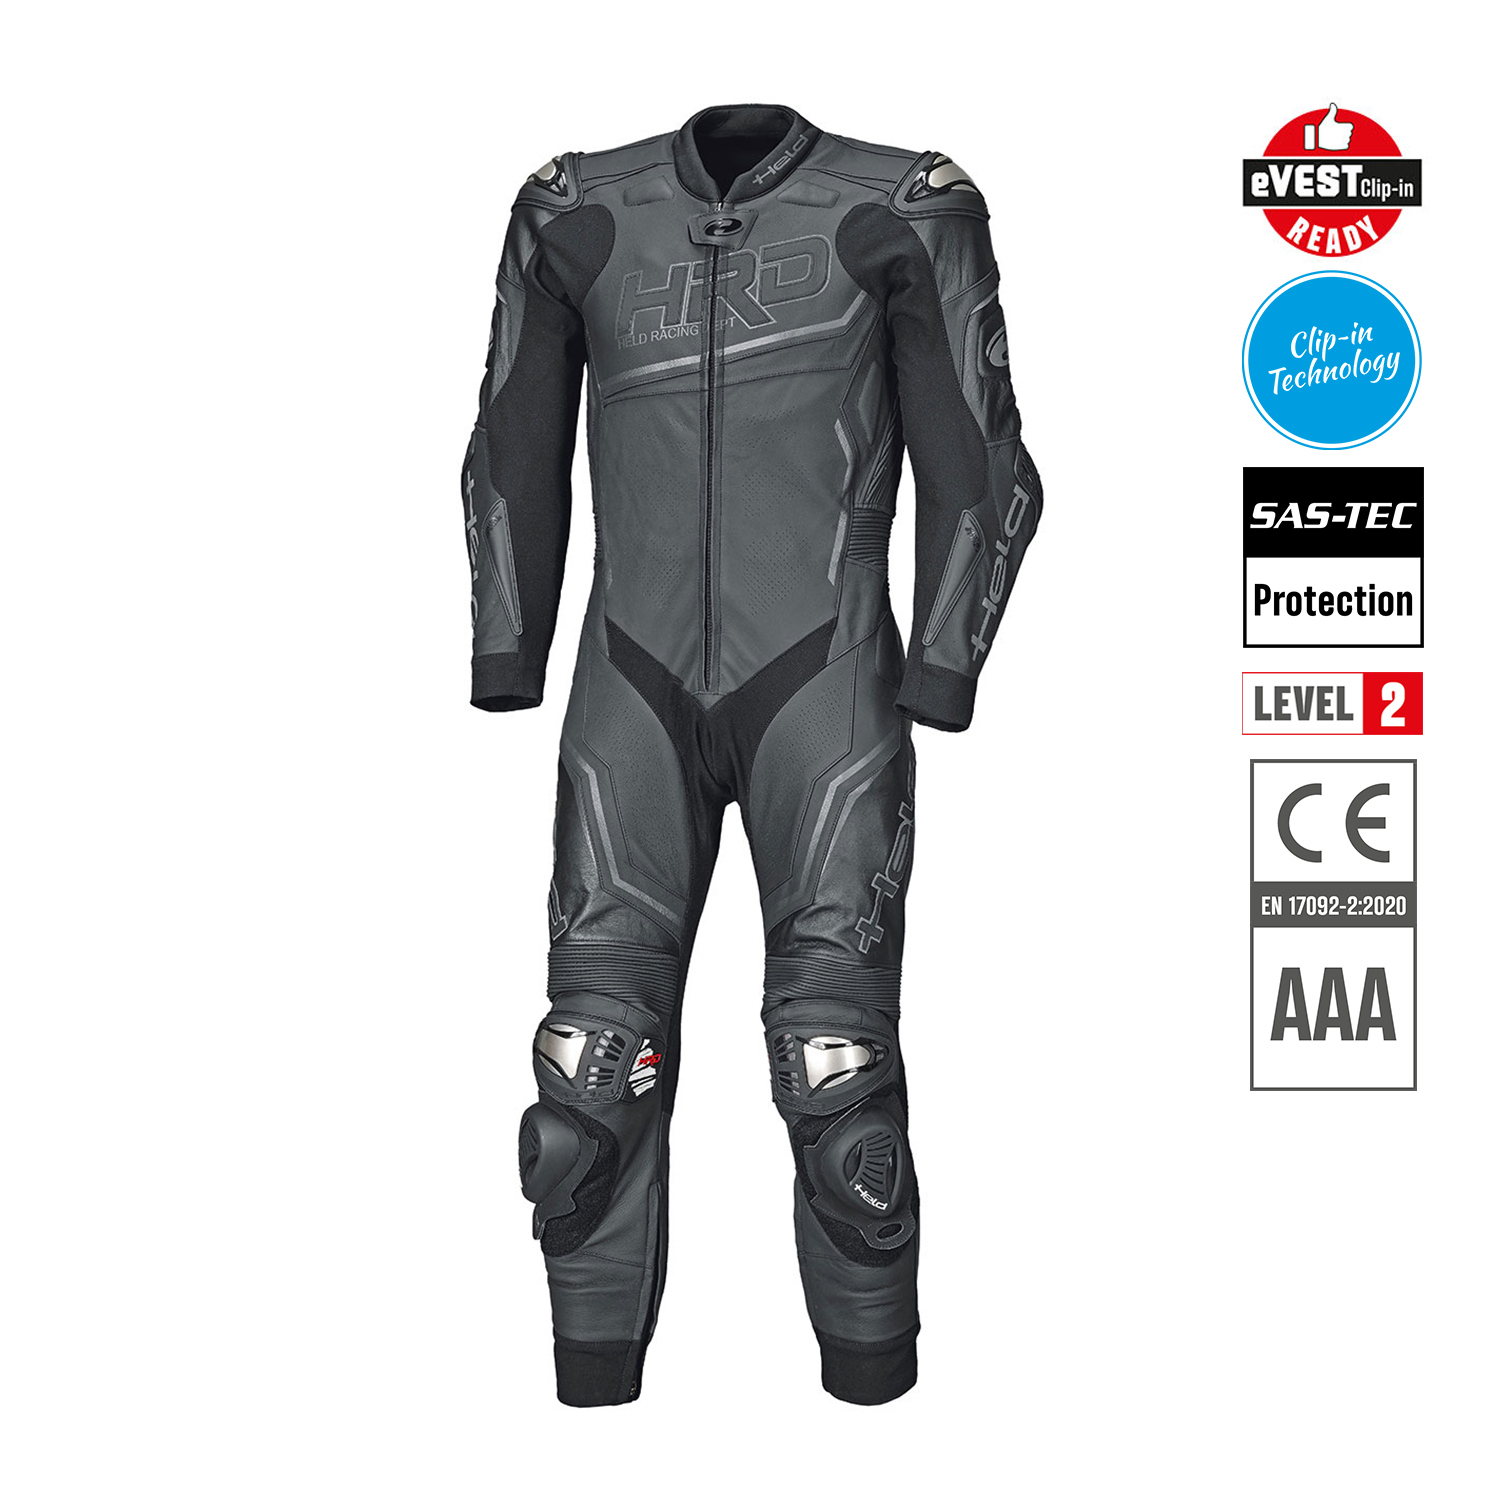 Held Slade II Suit Black - Available in Variouse Sizes